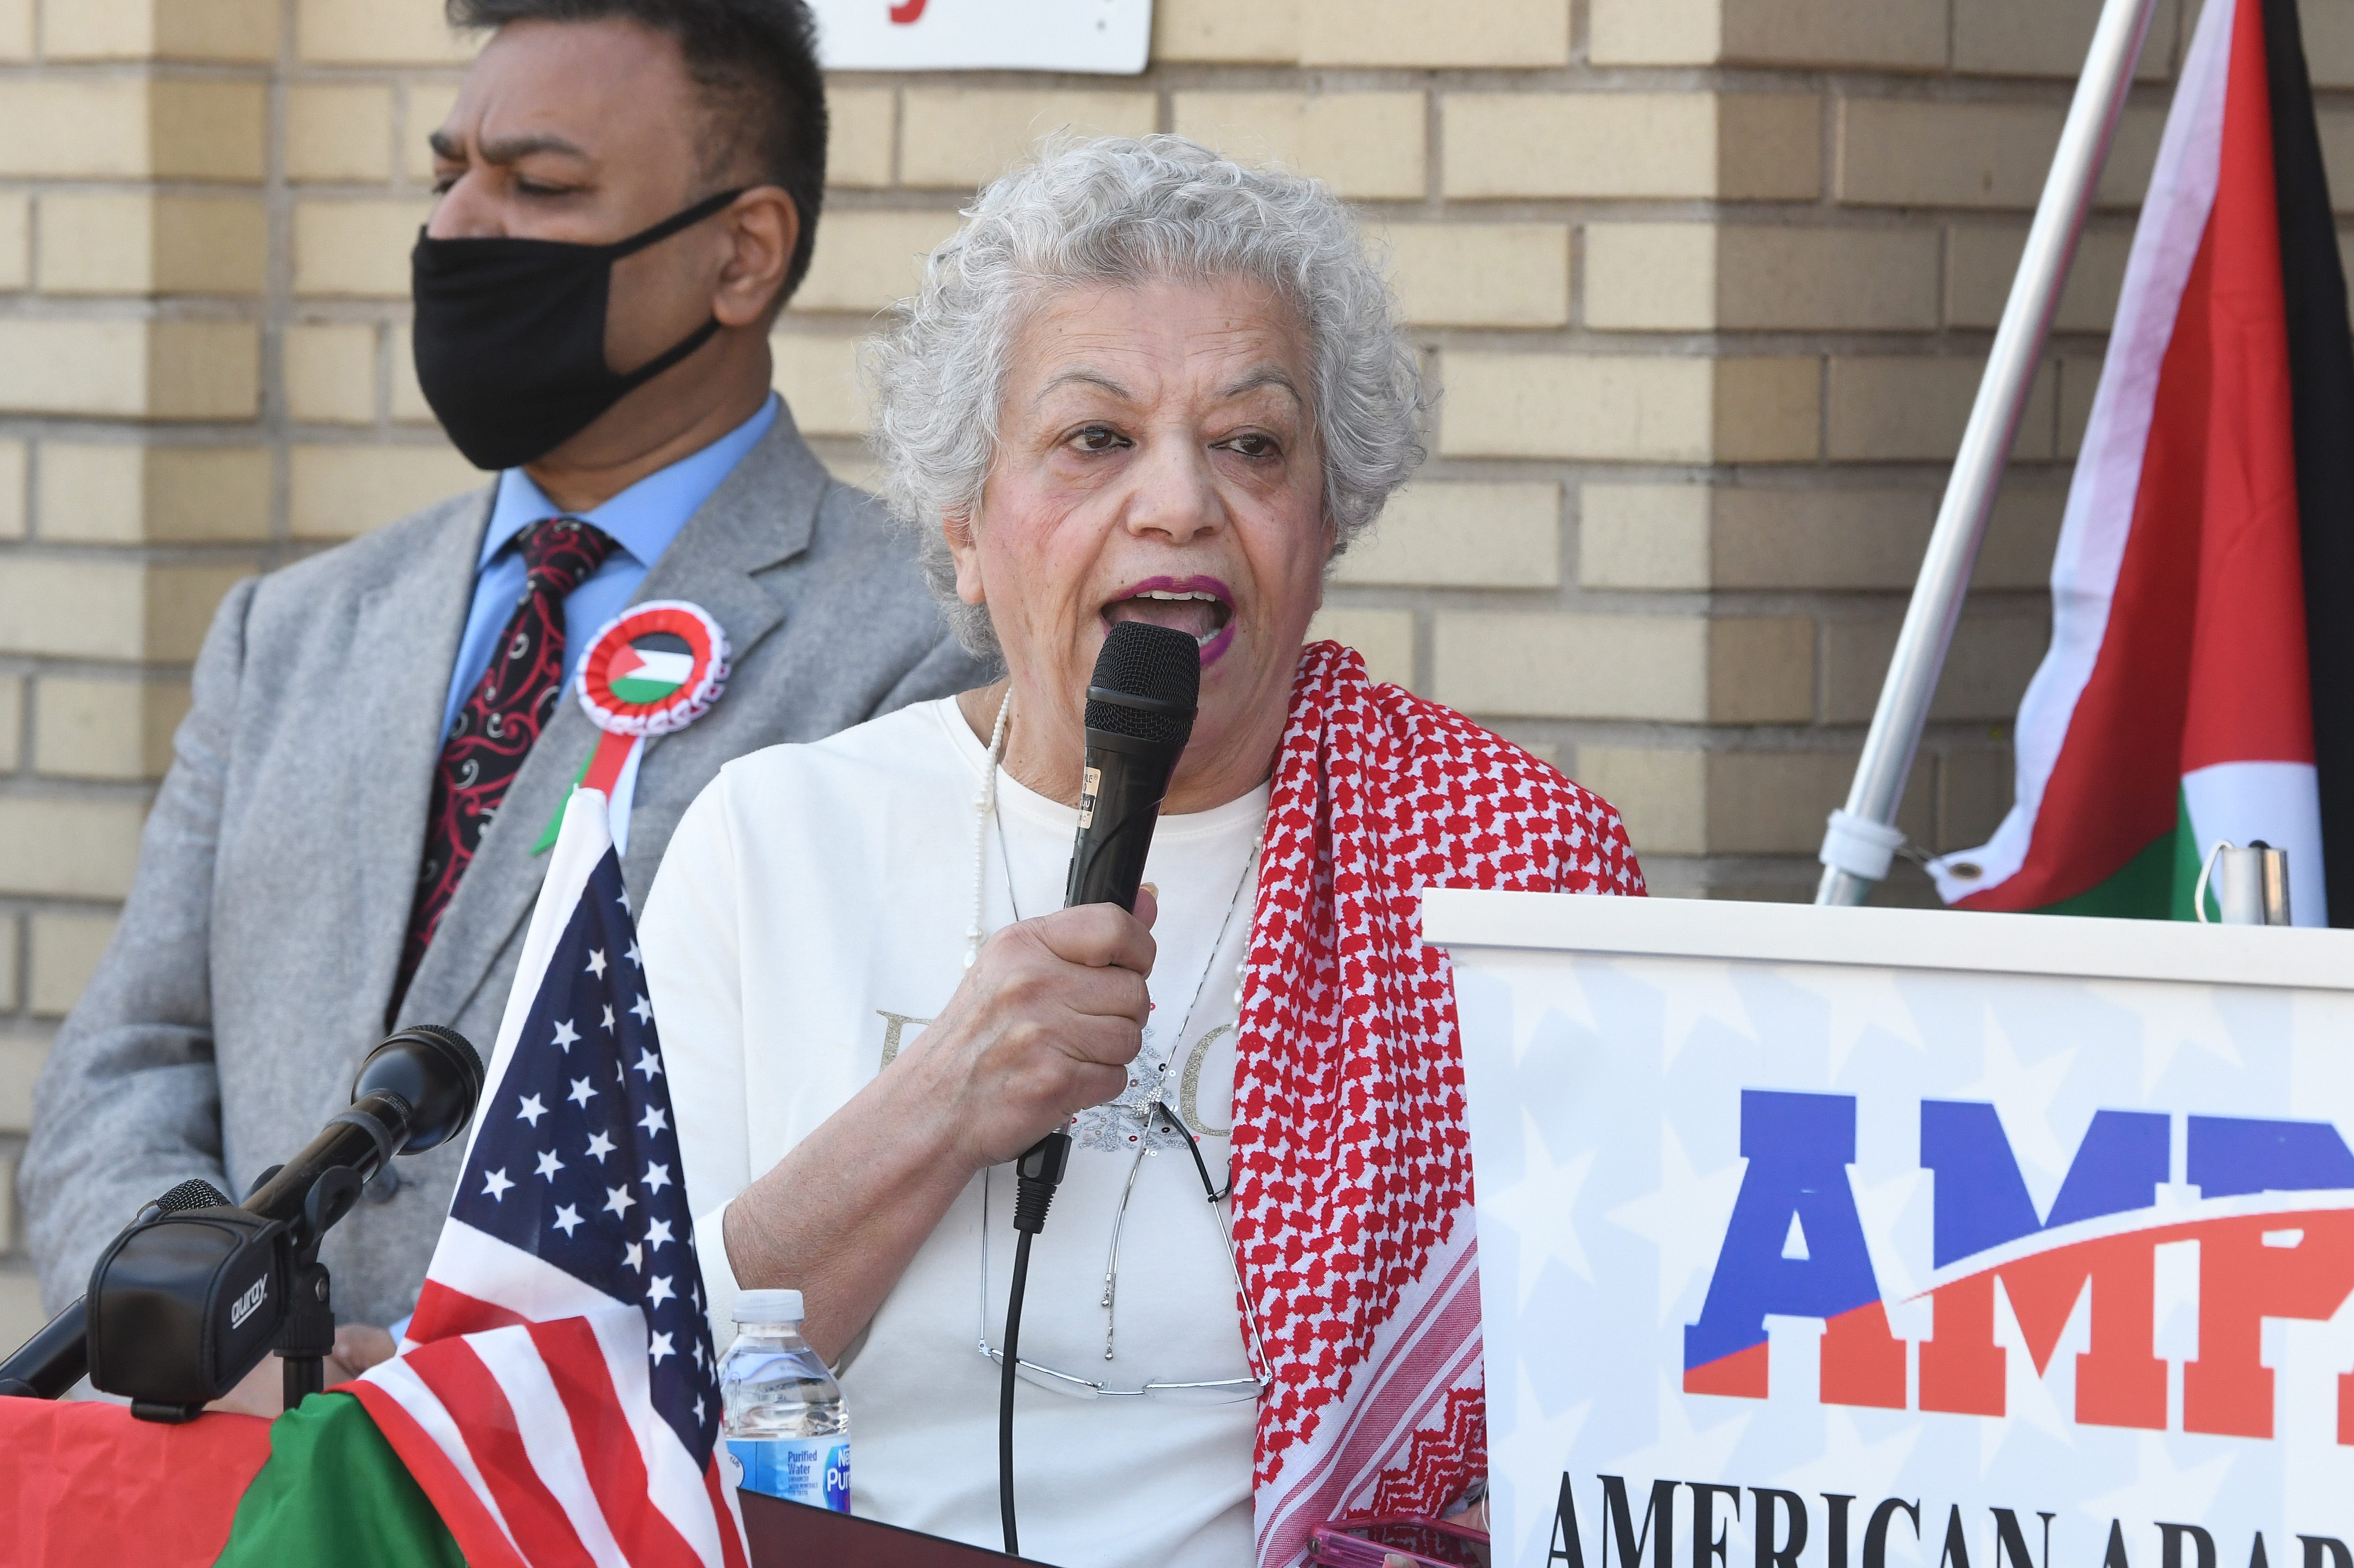 Nada Dalgamouni, global education director of the International Institute of Metropolitan Detroit, Inc. speaks during a press conference at the AMS Mosque in Dearborn.